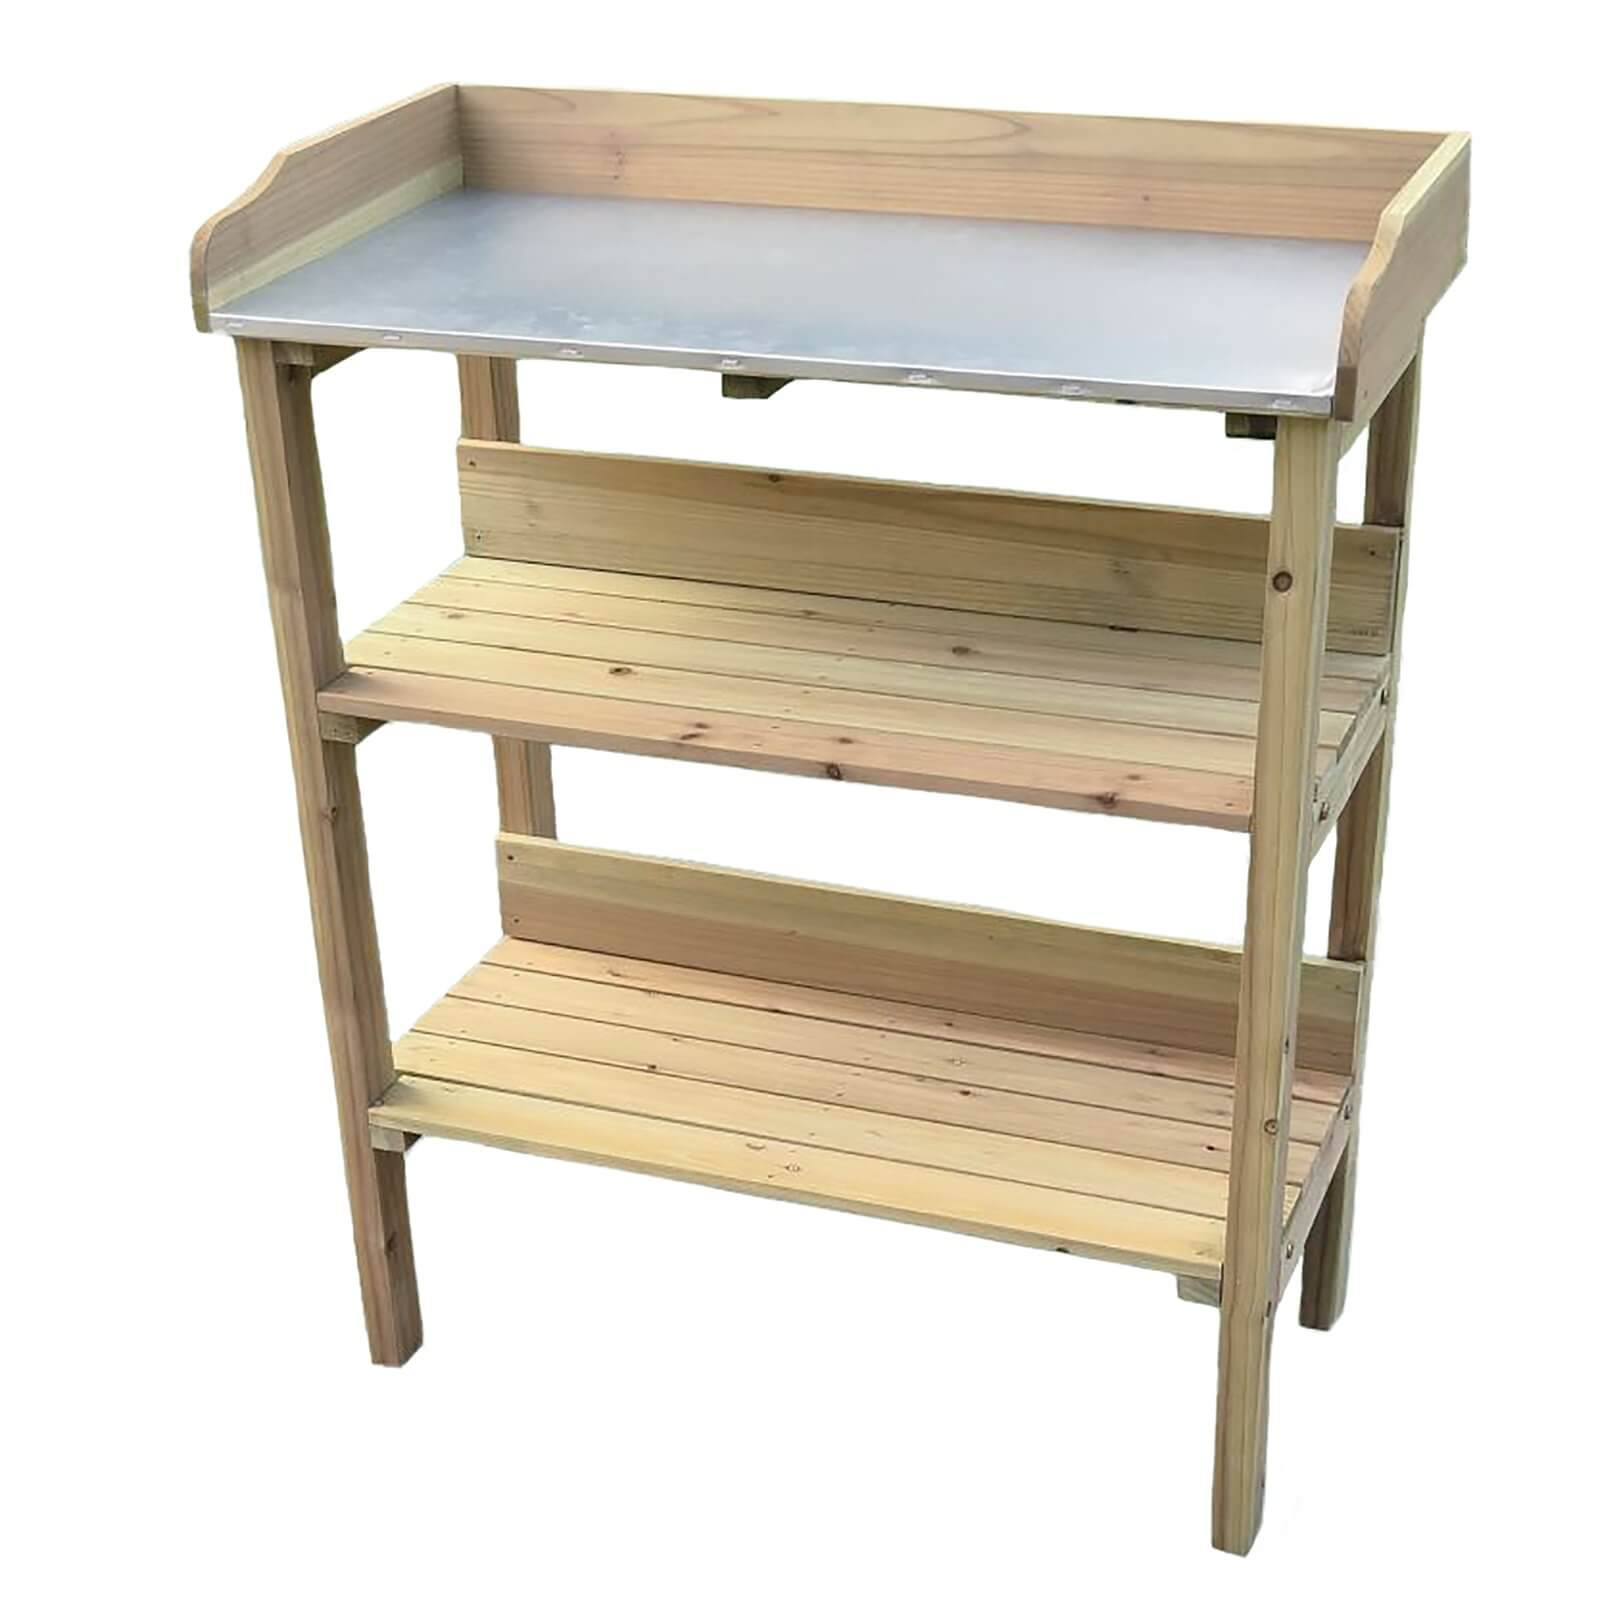 Wooden Potting Table